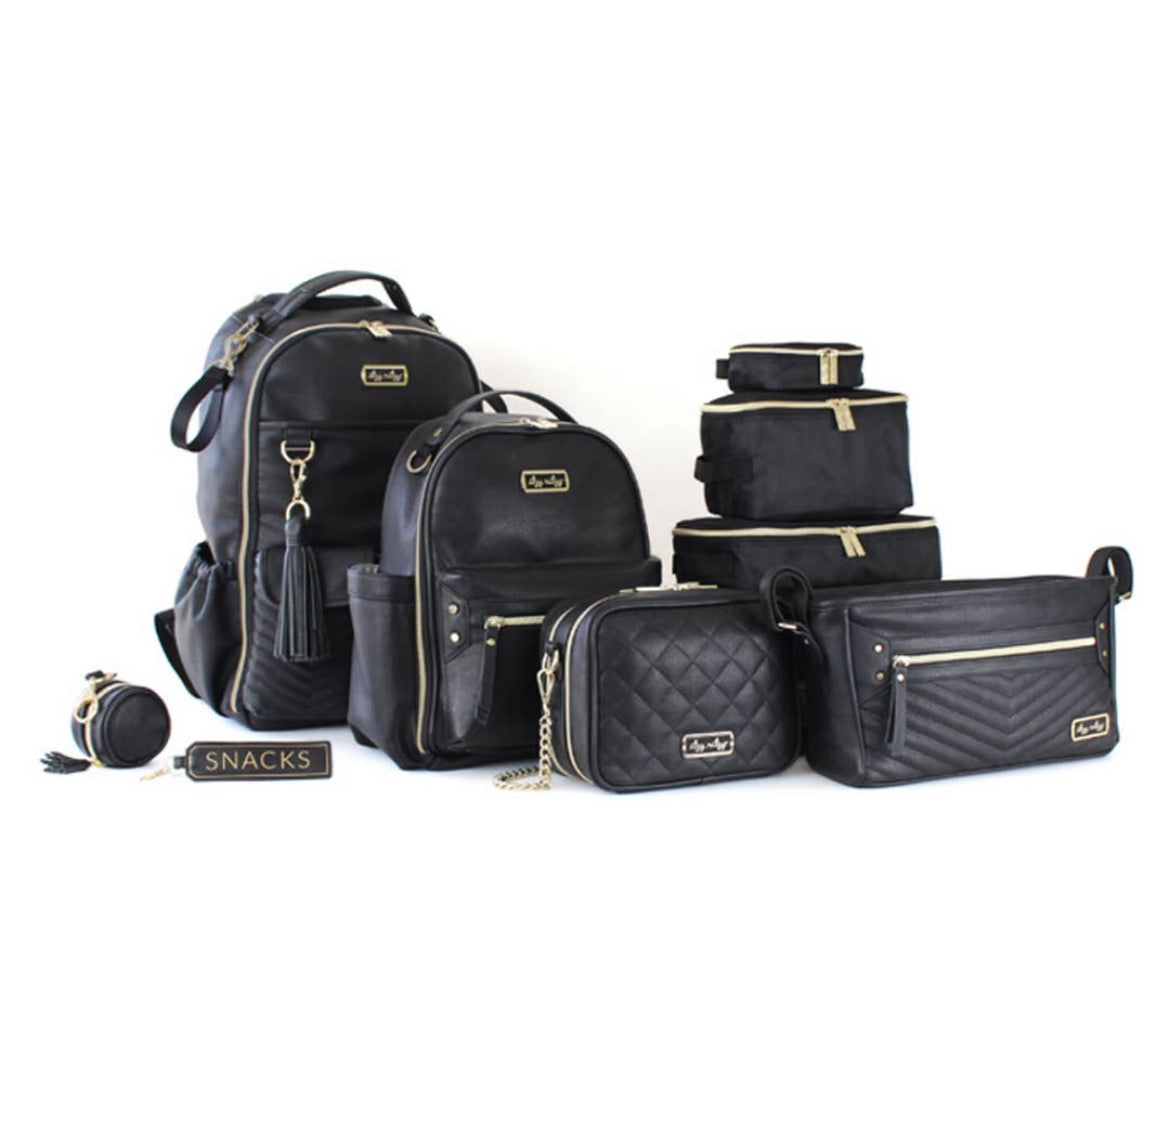 Itzy Ritzy Black & Gold Pack Like a Boss Diaper Bag Packing Cubes